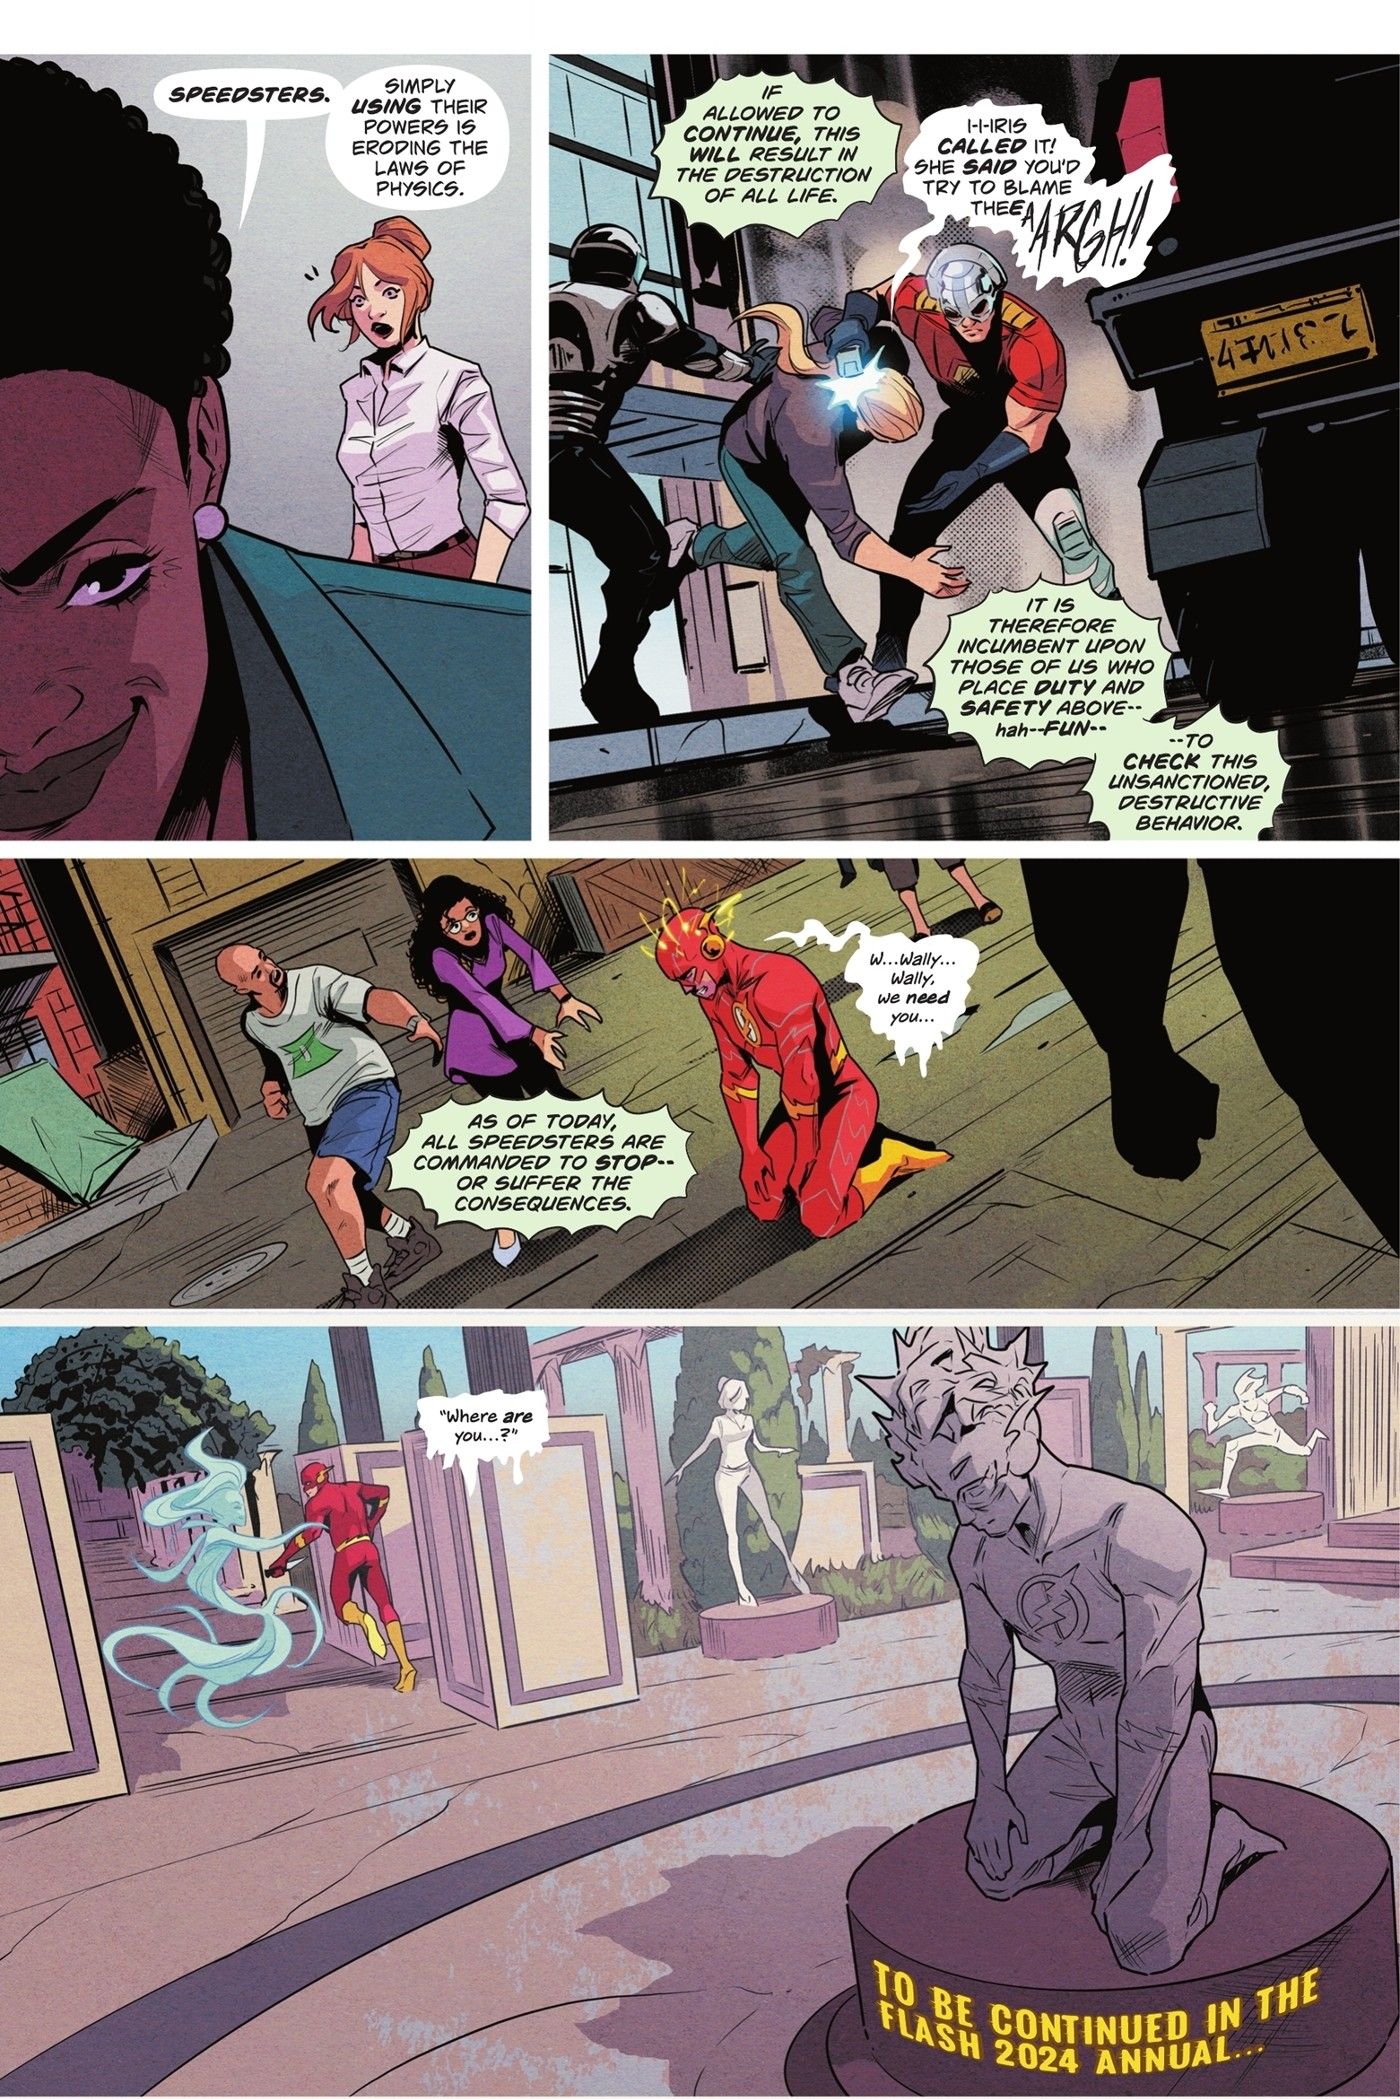 Four panels of Amanda Waller announcing a ban on speedsters.